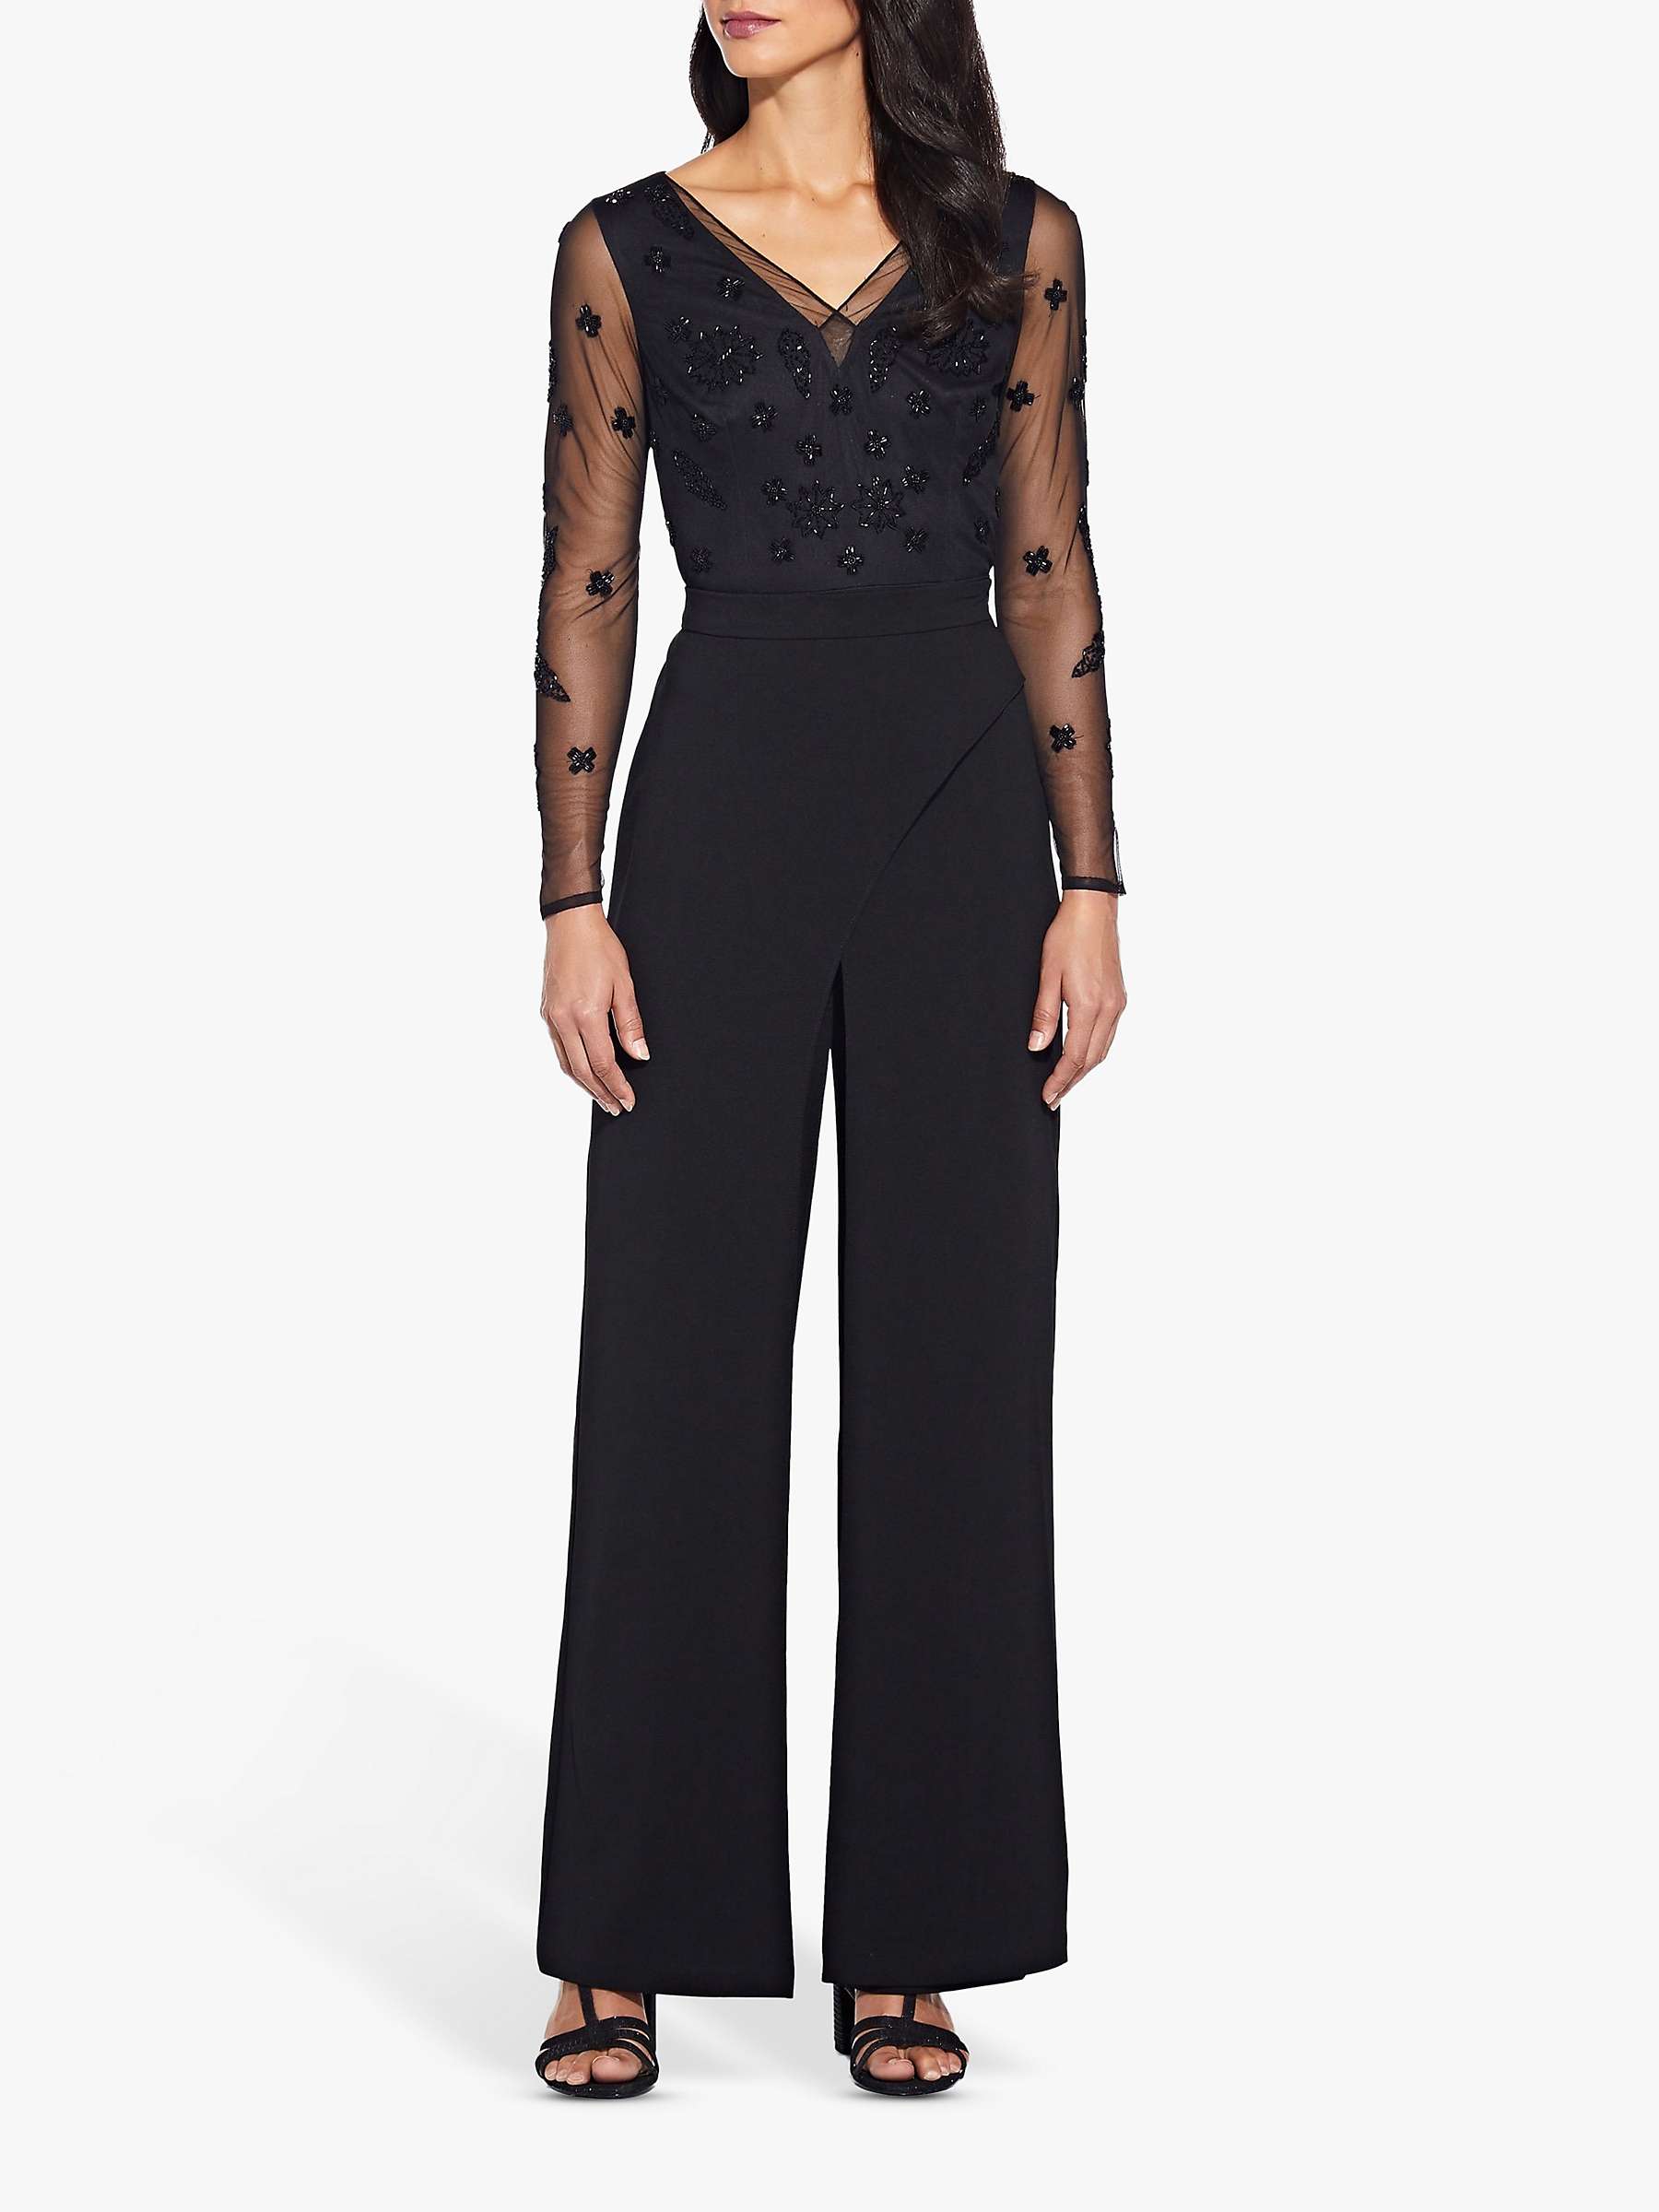 Buy Adrianna Papell Crepe Trousers, Black Online at johnlewis.com